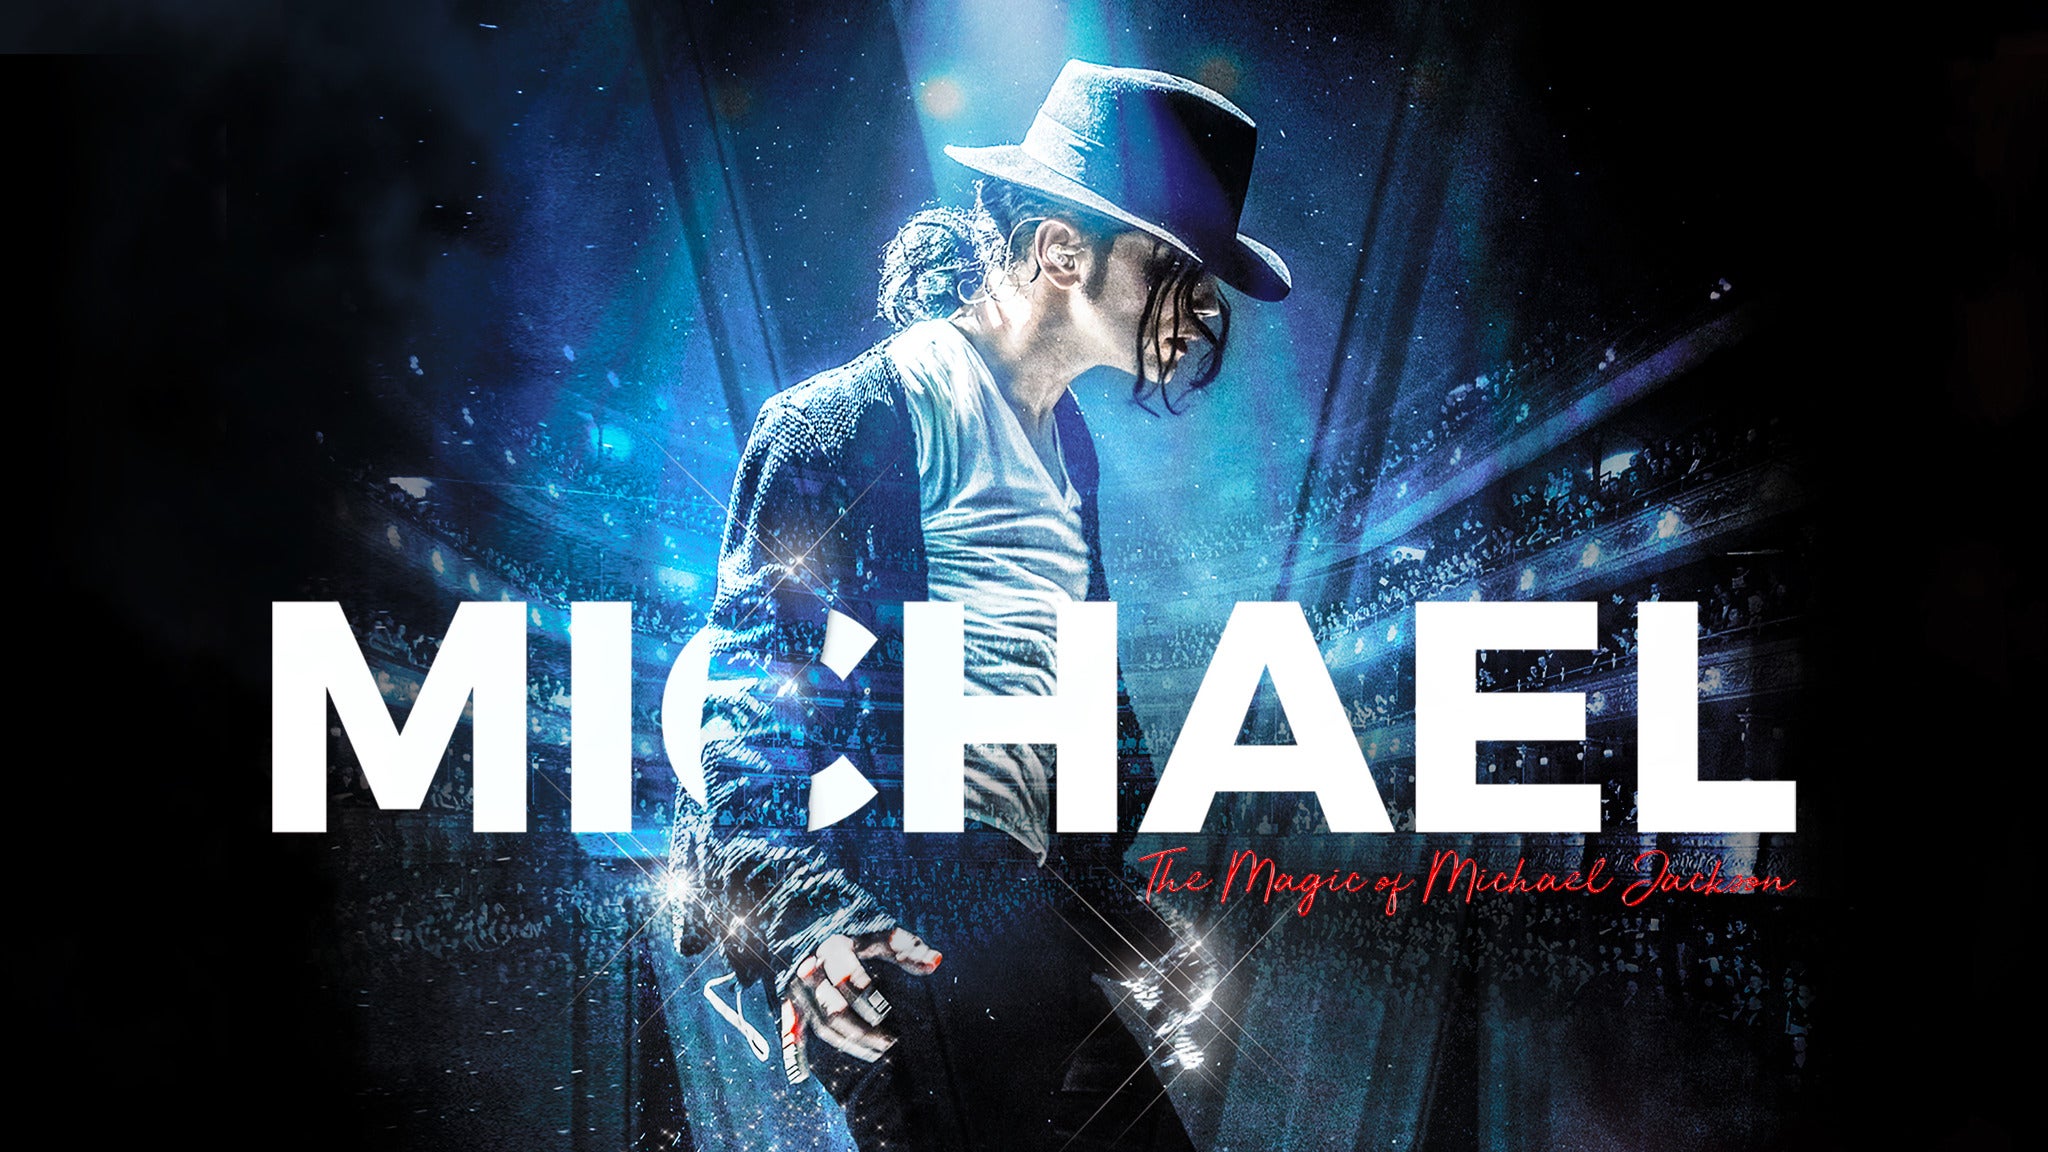 Image used with permission from Ticketmaster | Michael Starring Ben tickets